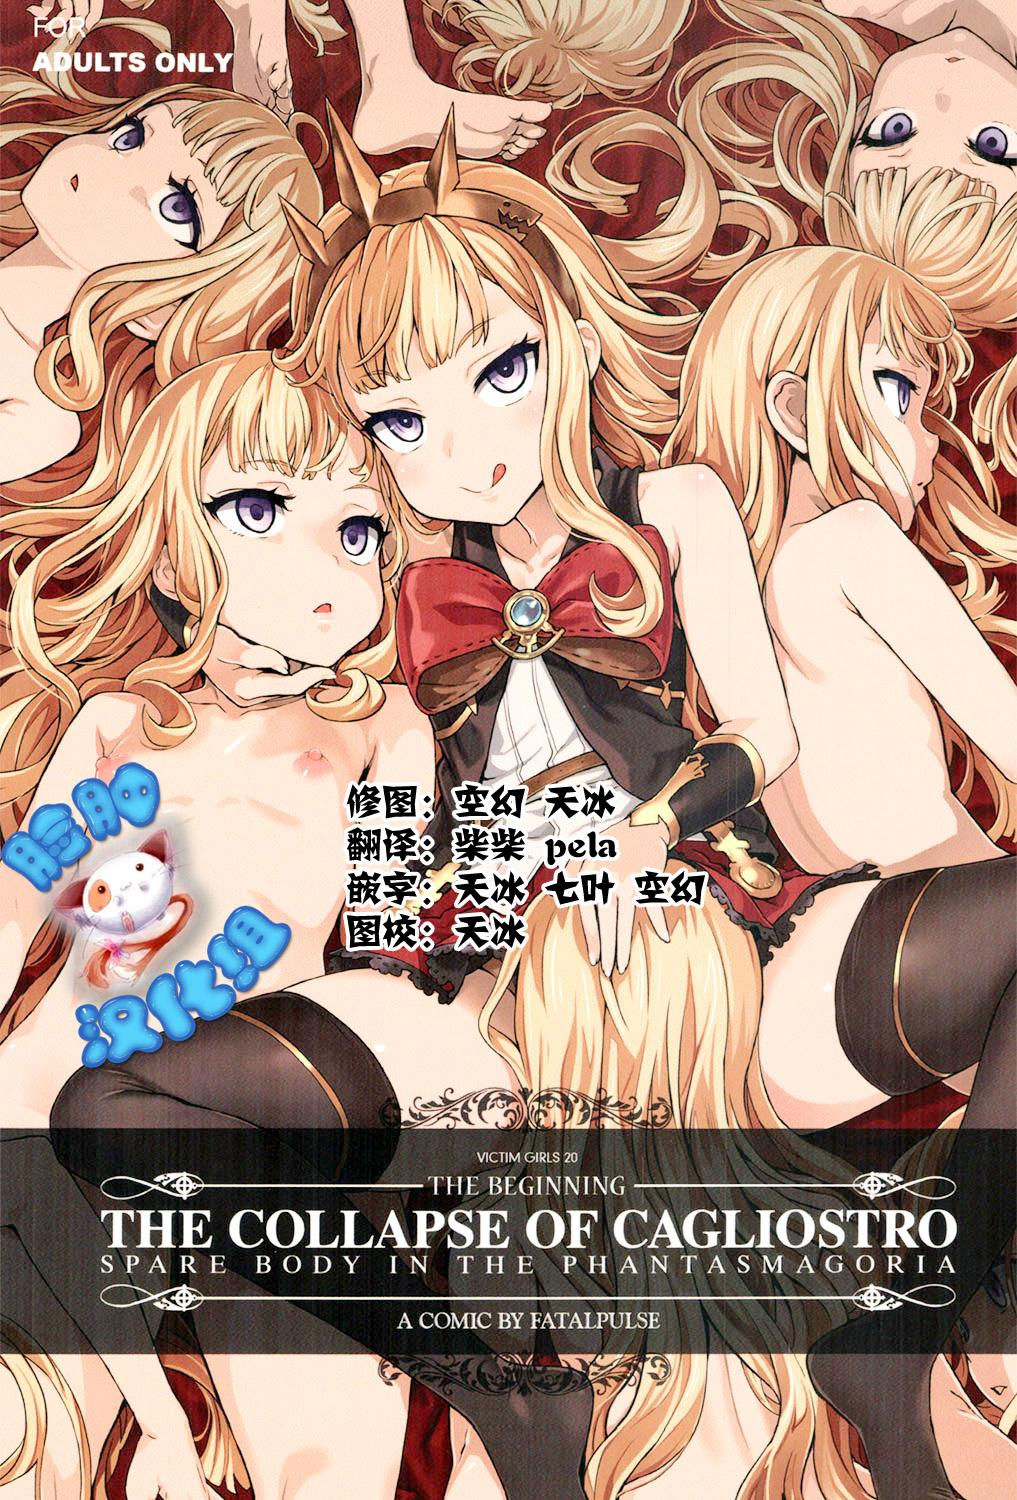 Cam Sex Victim Girls 20 THE COLLAPSE OF CAGLIOSTRO - Granblue fantasy Gay Deepthroat - Page 1